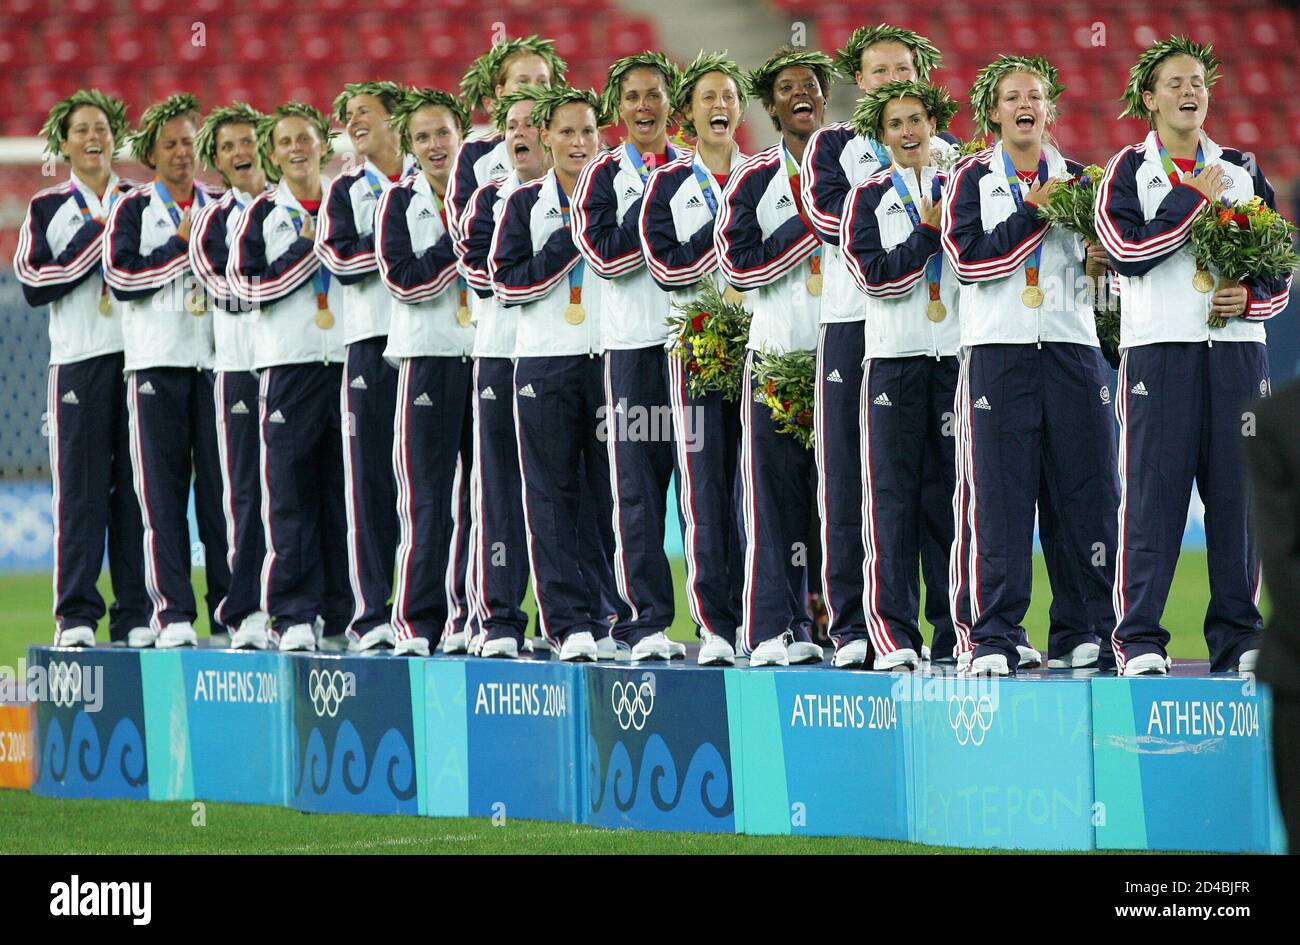 Players of the U.S. celebrates after winning the gold medal match against [Brazil] in the women's soccer competition at the Athens 2004 Olympic Summer Games August 26, 2004. [Brazil took the silver medal and Germany took the bronze.] Stock Photo